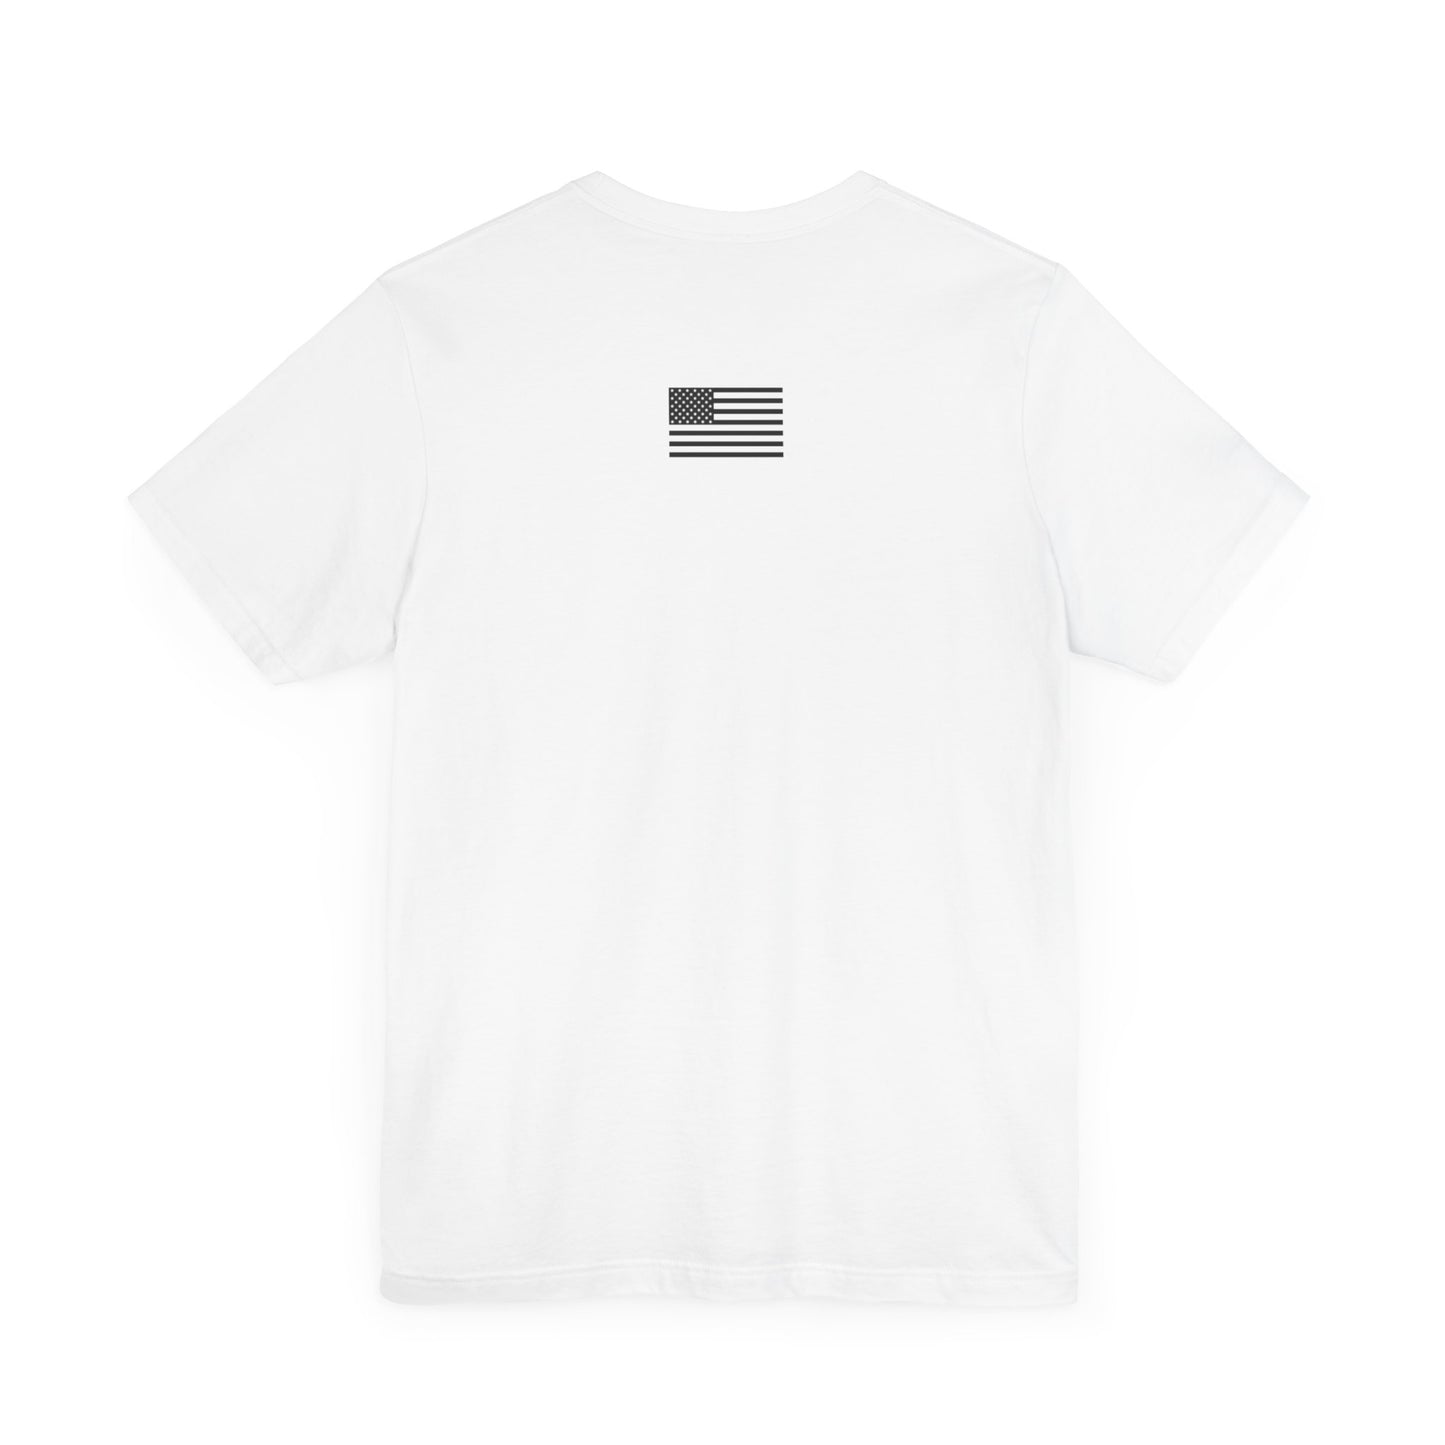 Free The Frames Silhouette Tee